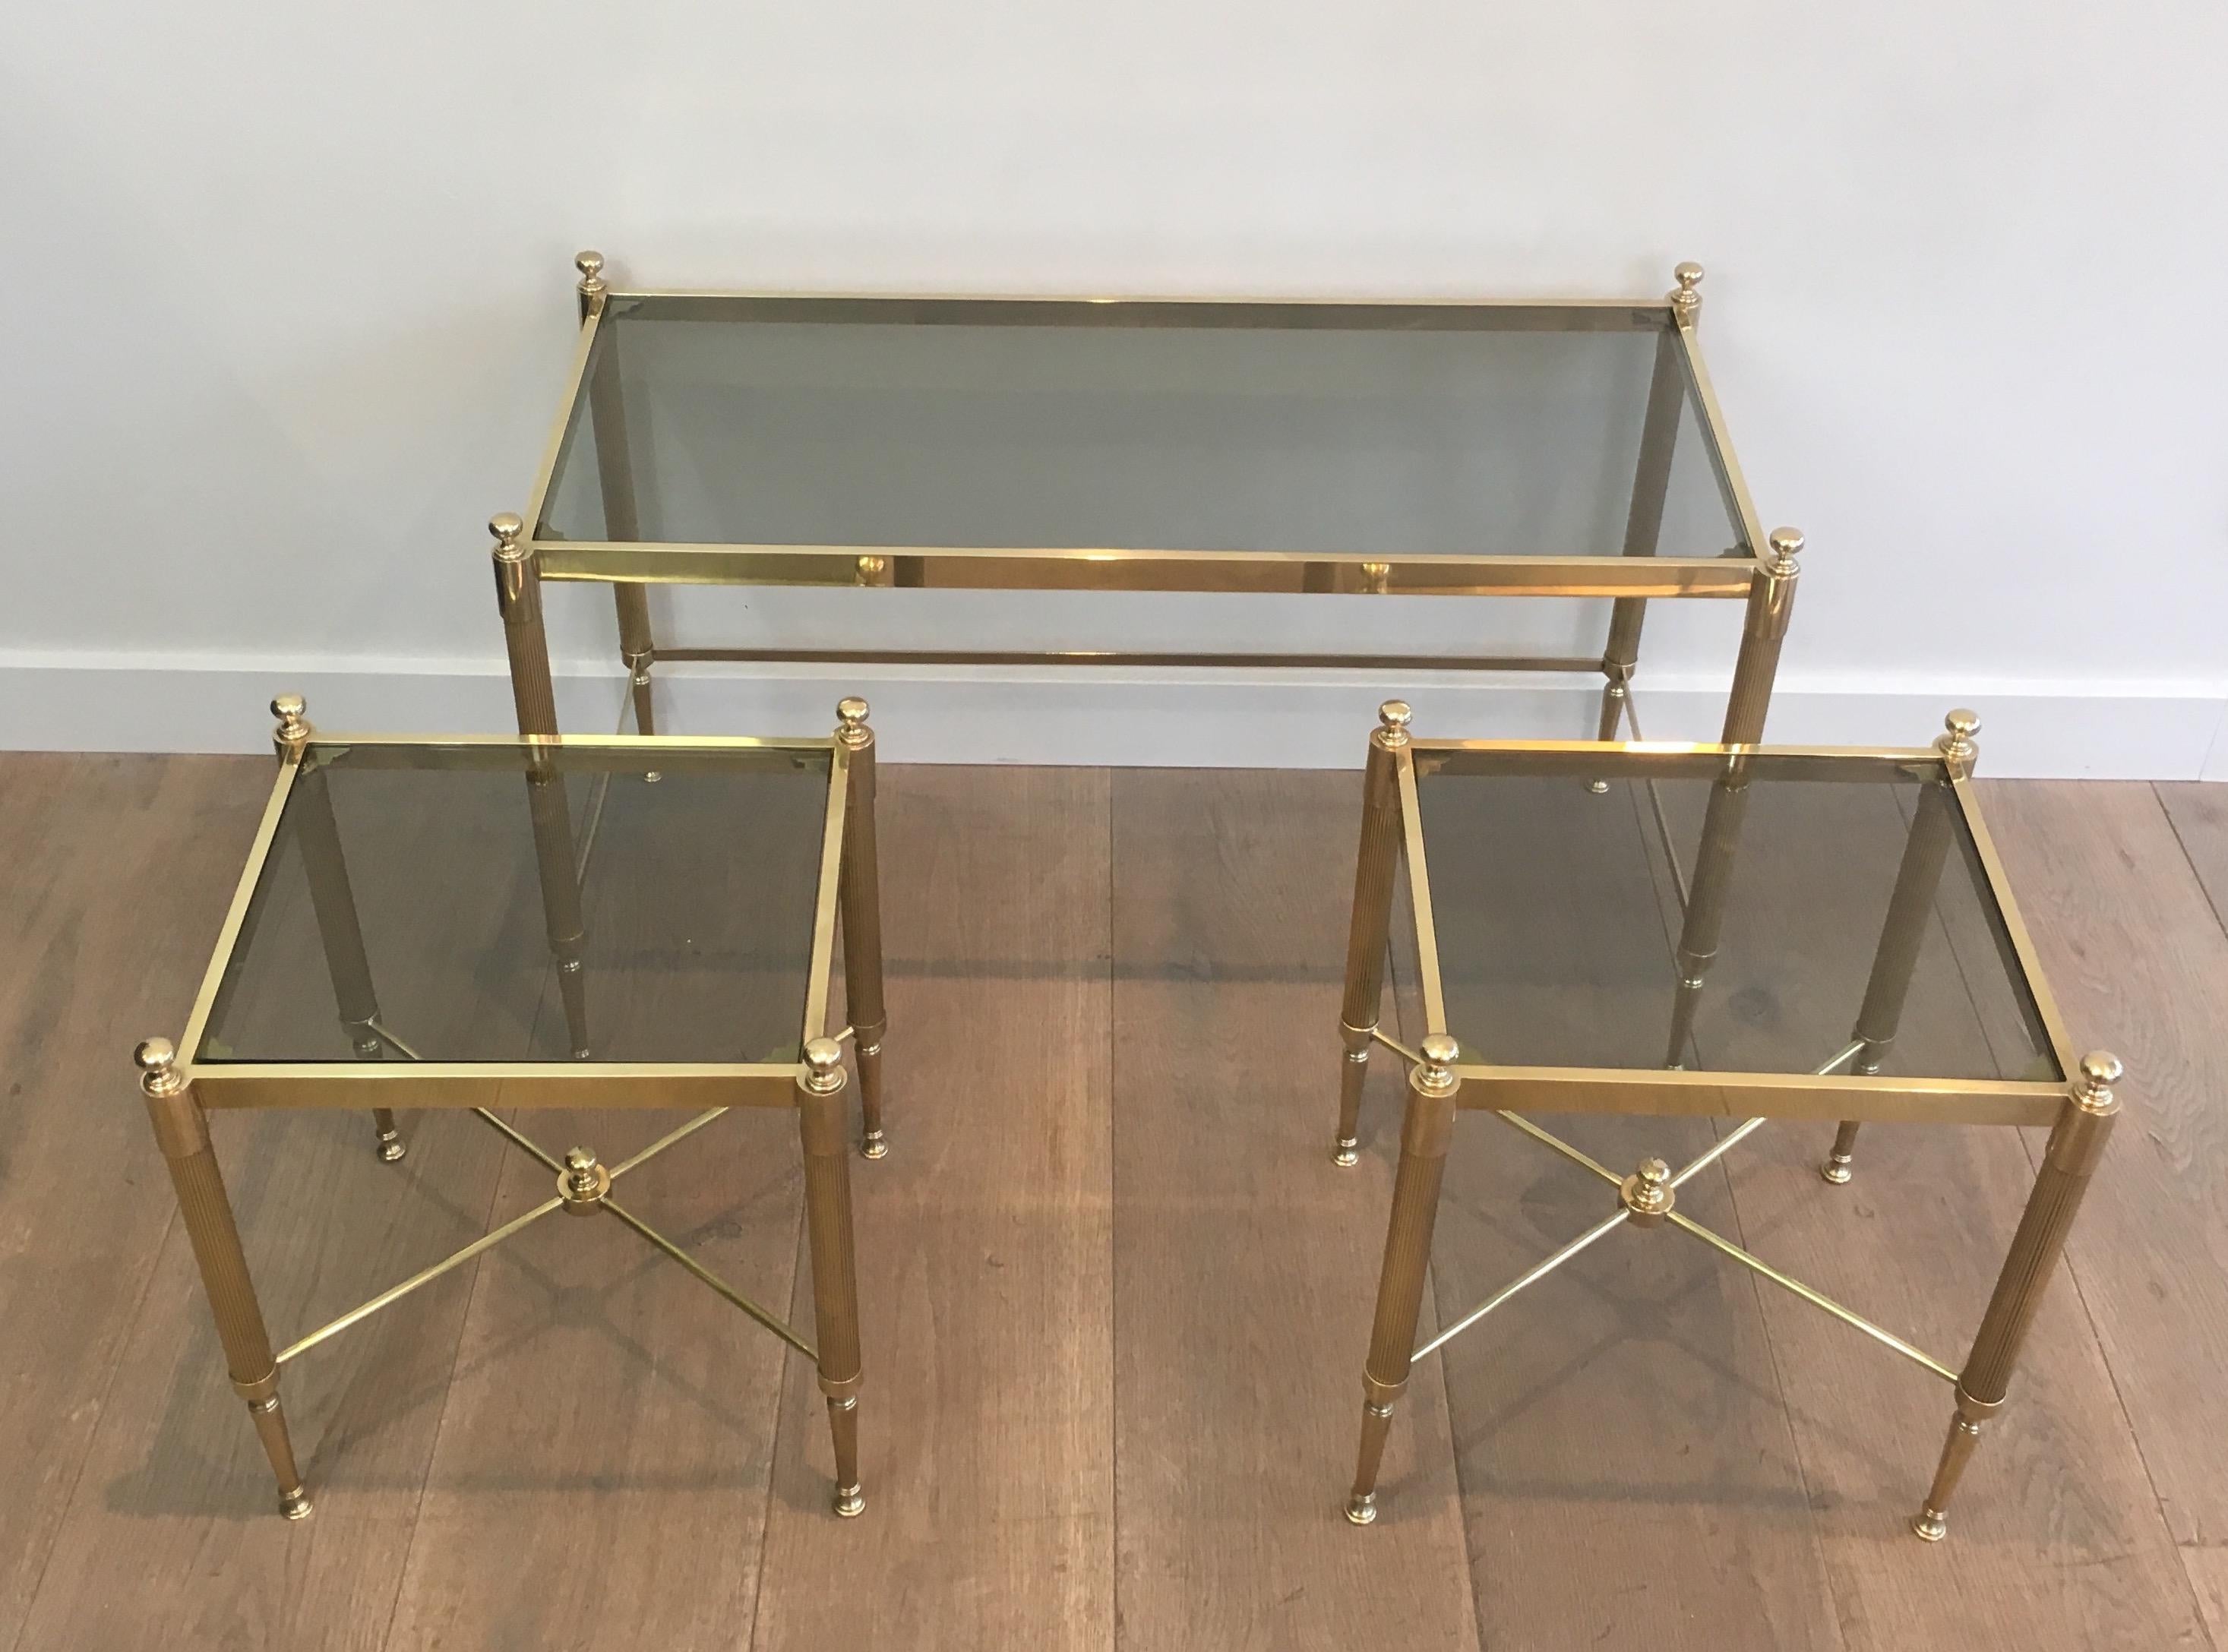 This very nice tripartite coffee table is made of brass with greenisg glass shelves. The table is made of a main table and 2 nesting side tables sliding under the main table. This is a French work, circa 1970.